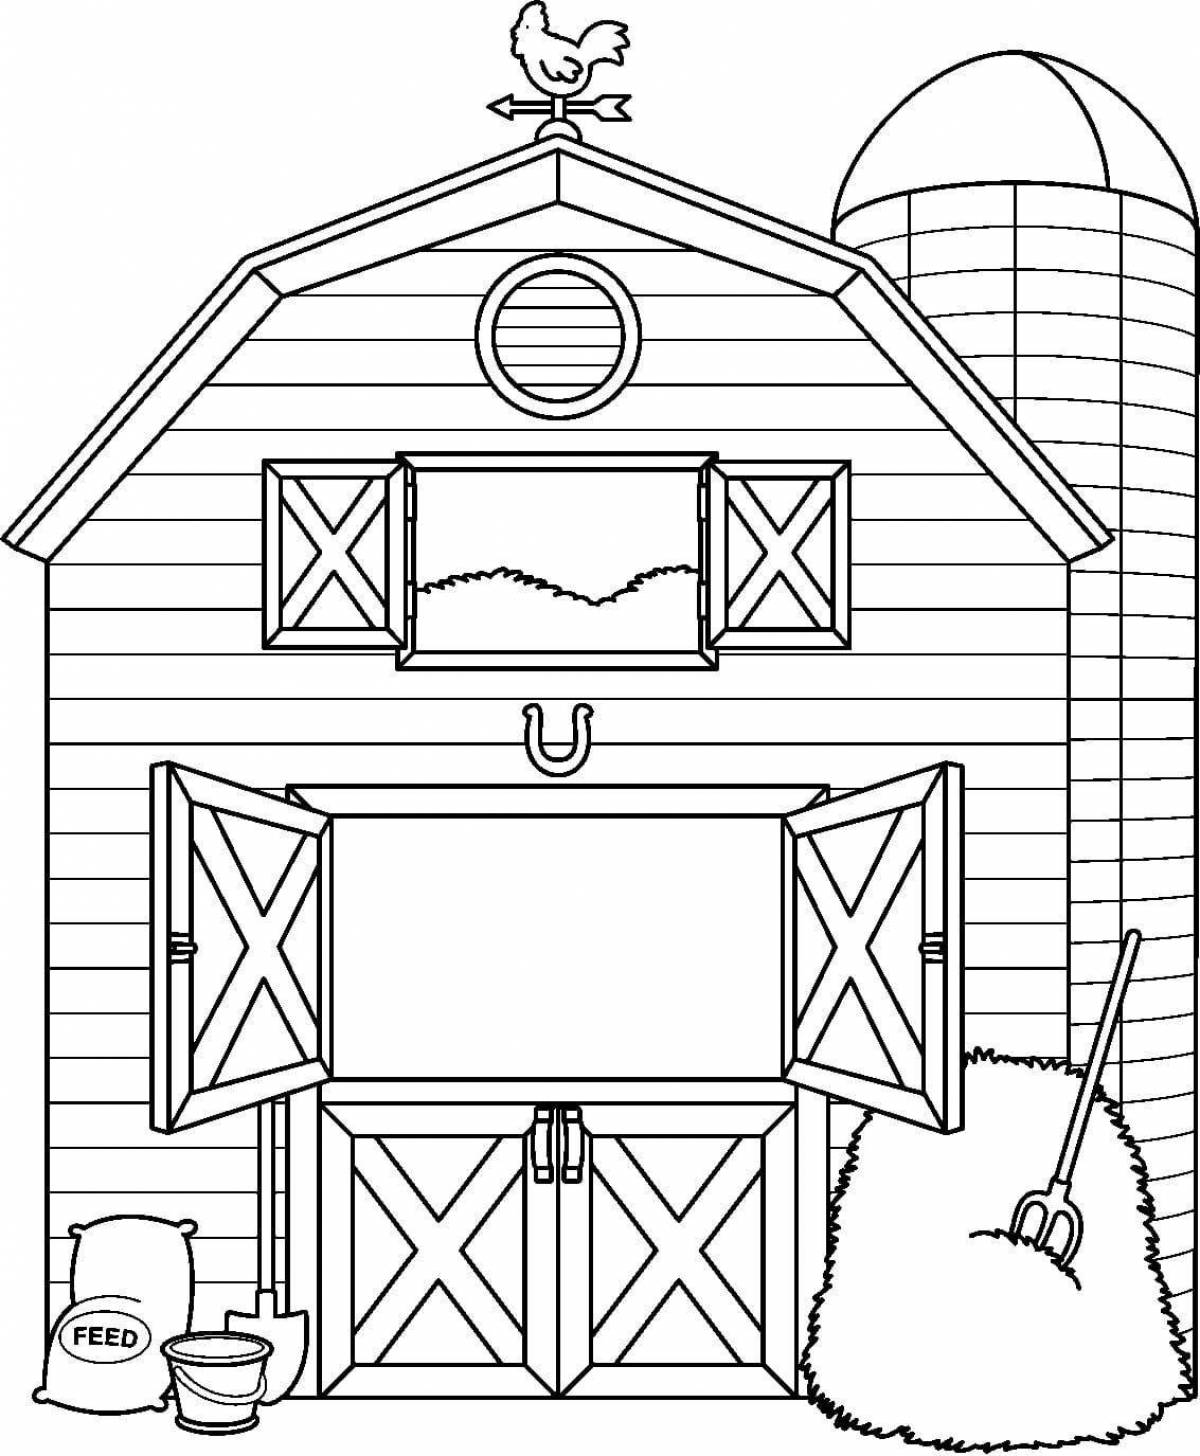 Children's Chicken Coop Coloring Page for Toddlers